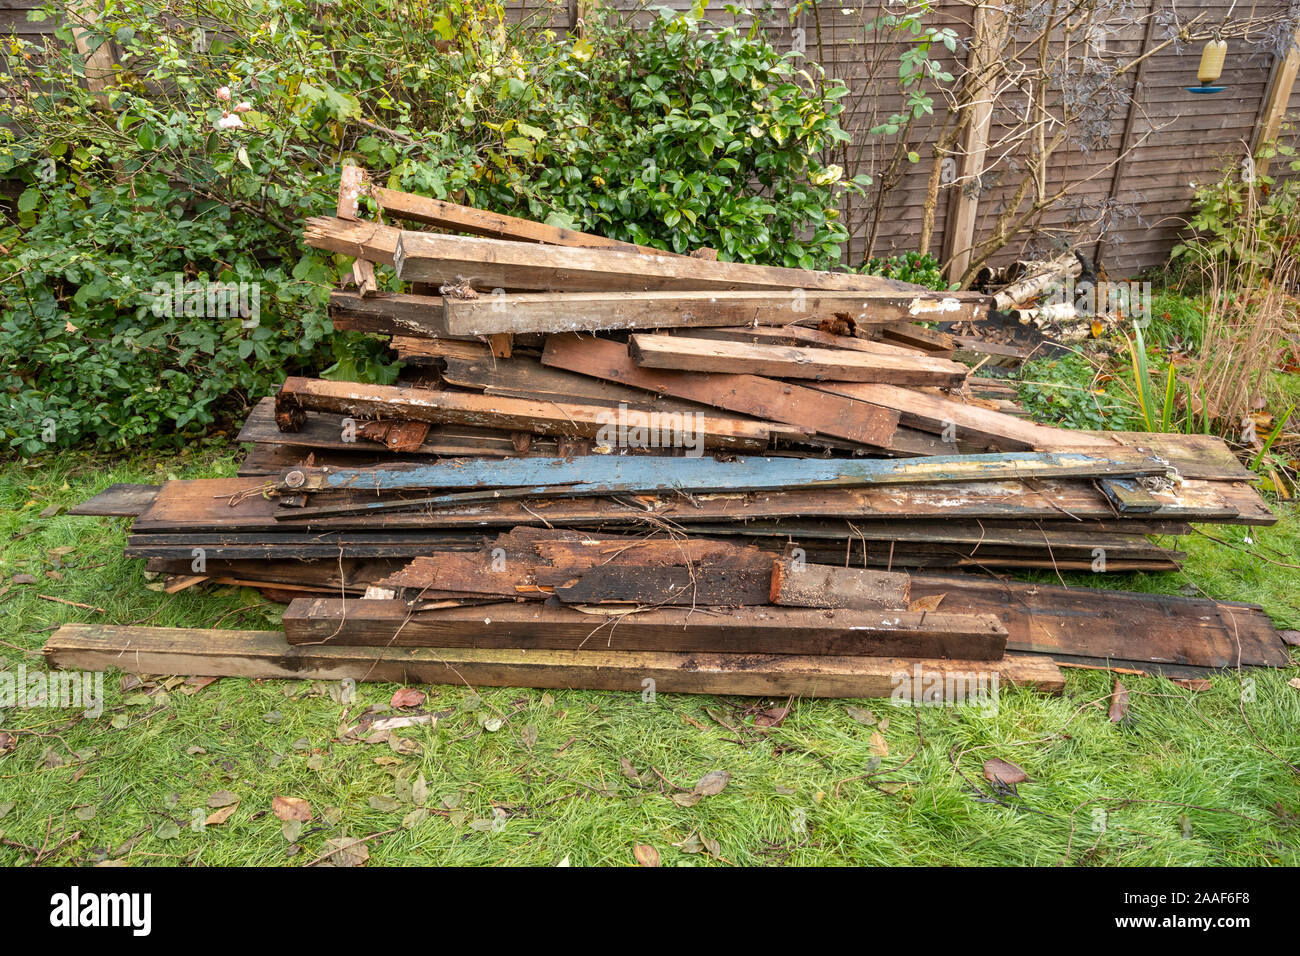 Large pile of old wood on garden lawn after demolishing a shed. Mess or messy, untidy garden. Stock Photo